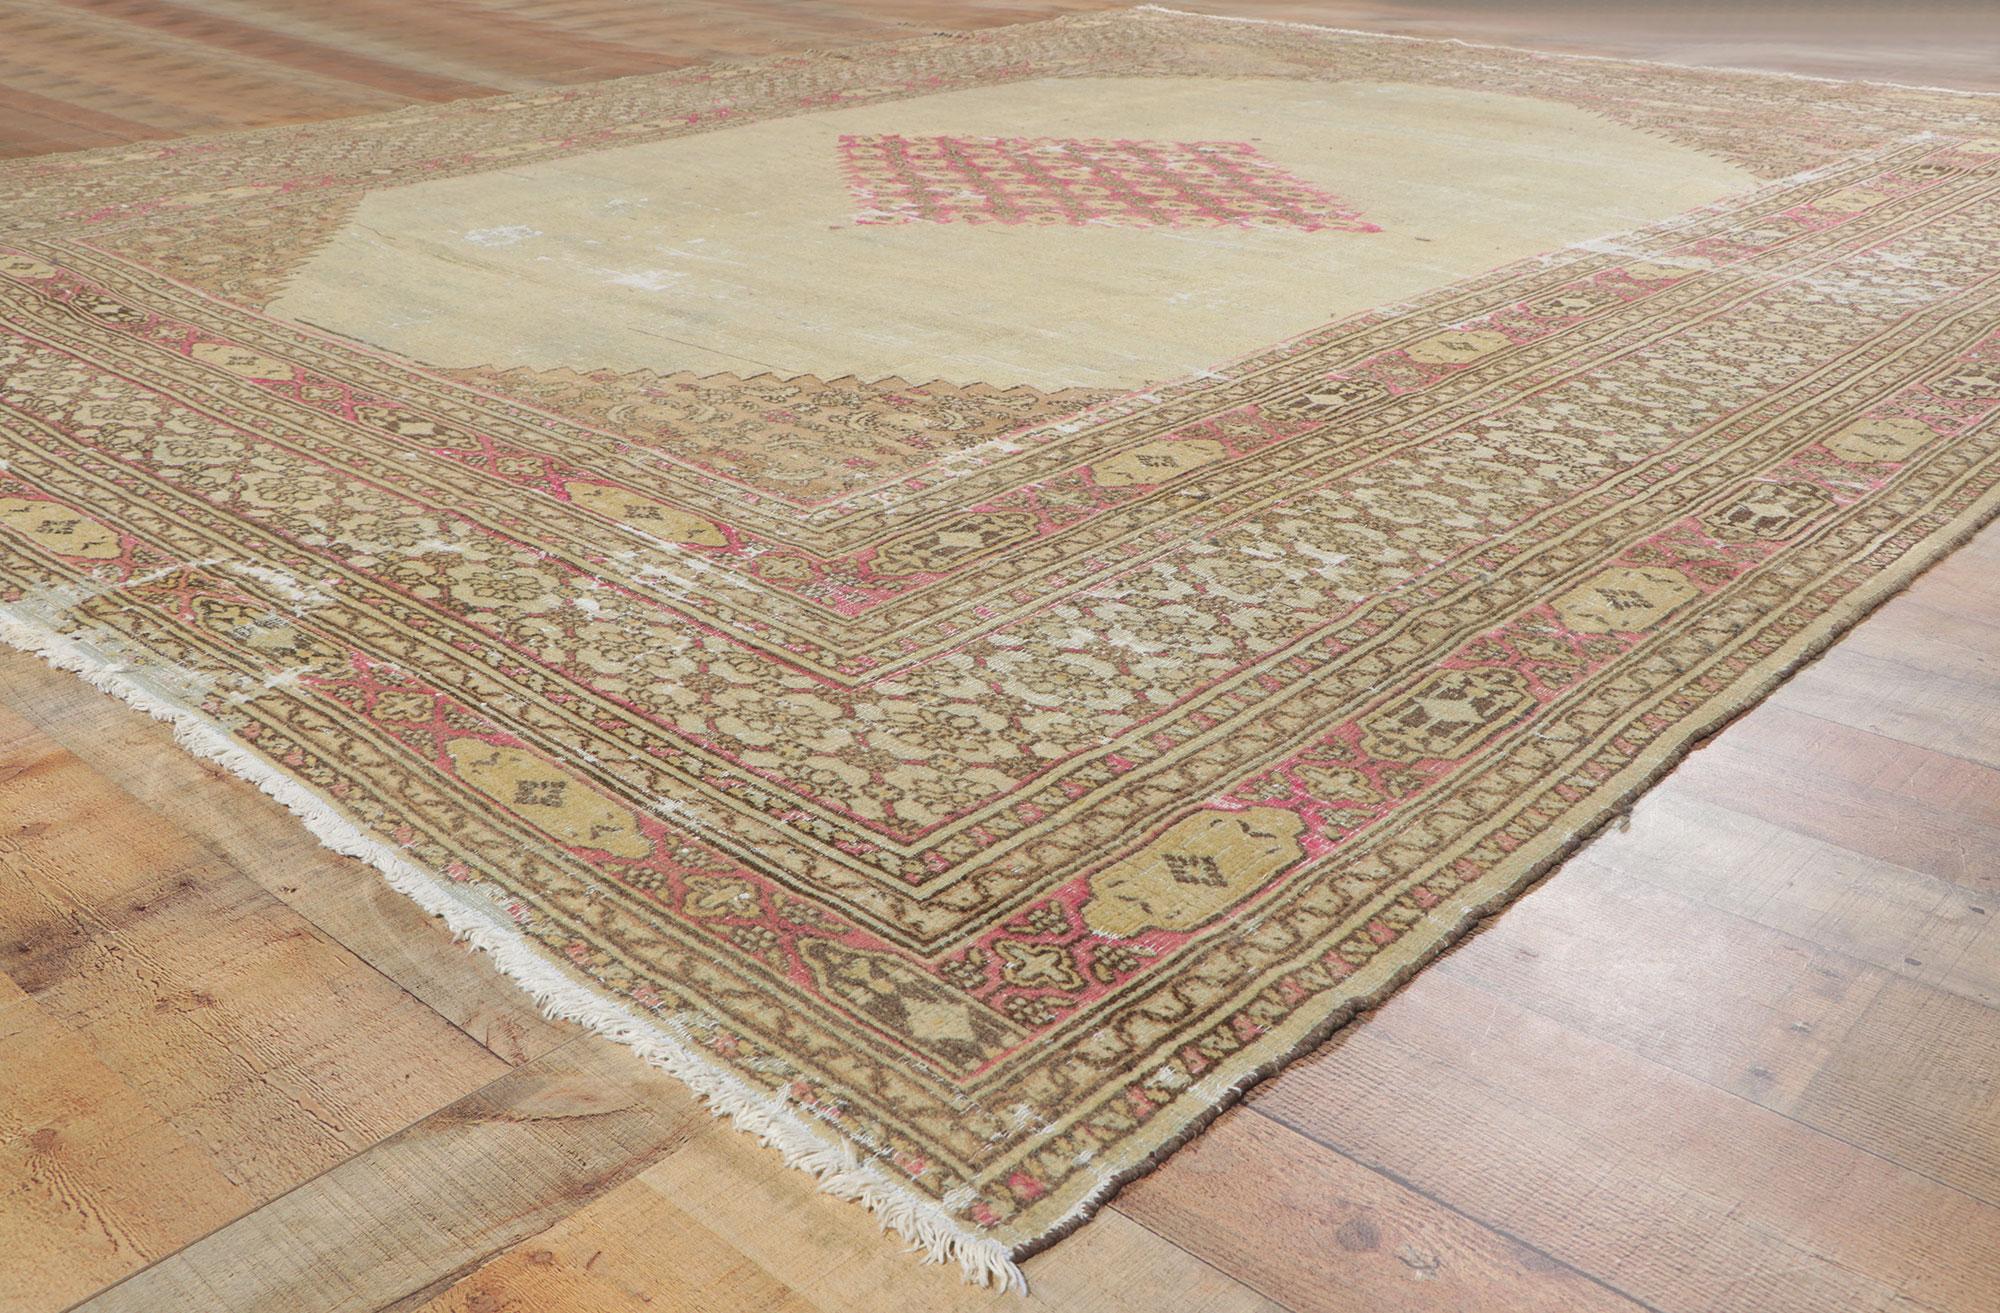 Late 19th Century Antique Persian Khorassan Rug with English Manor Style For Sale 5